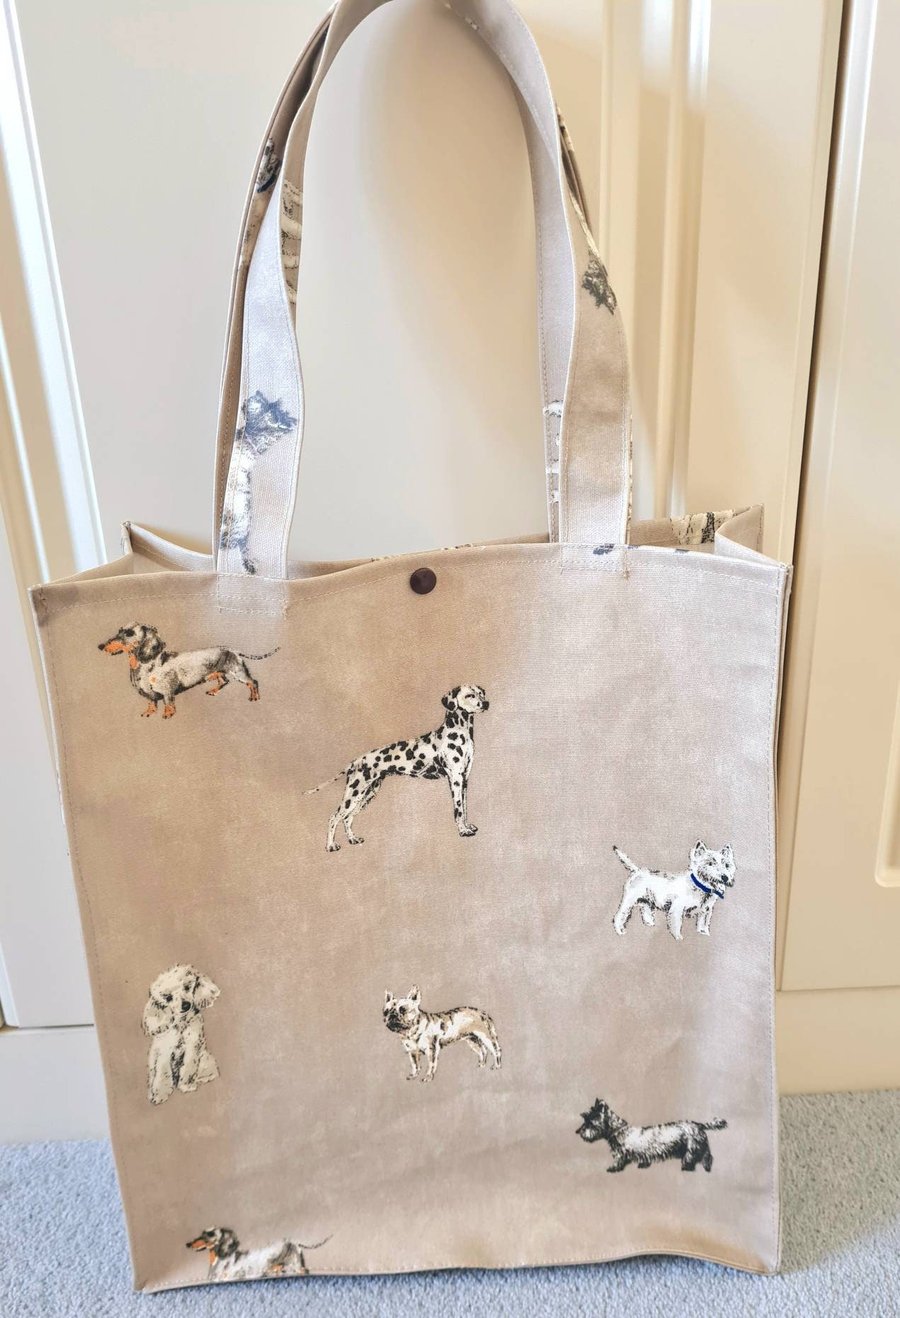 Booktote bag made in dog breeds oilcloth